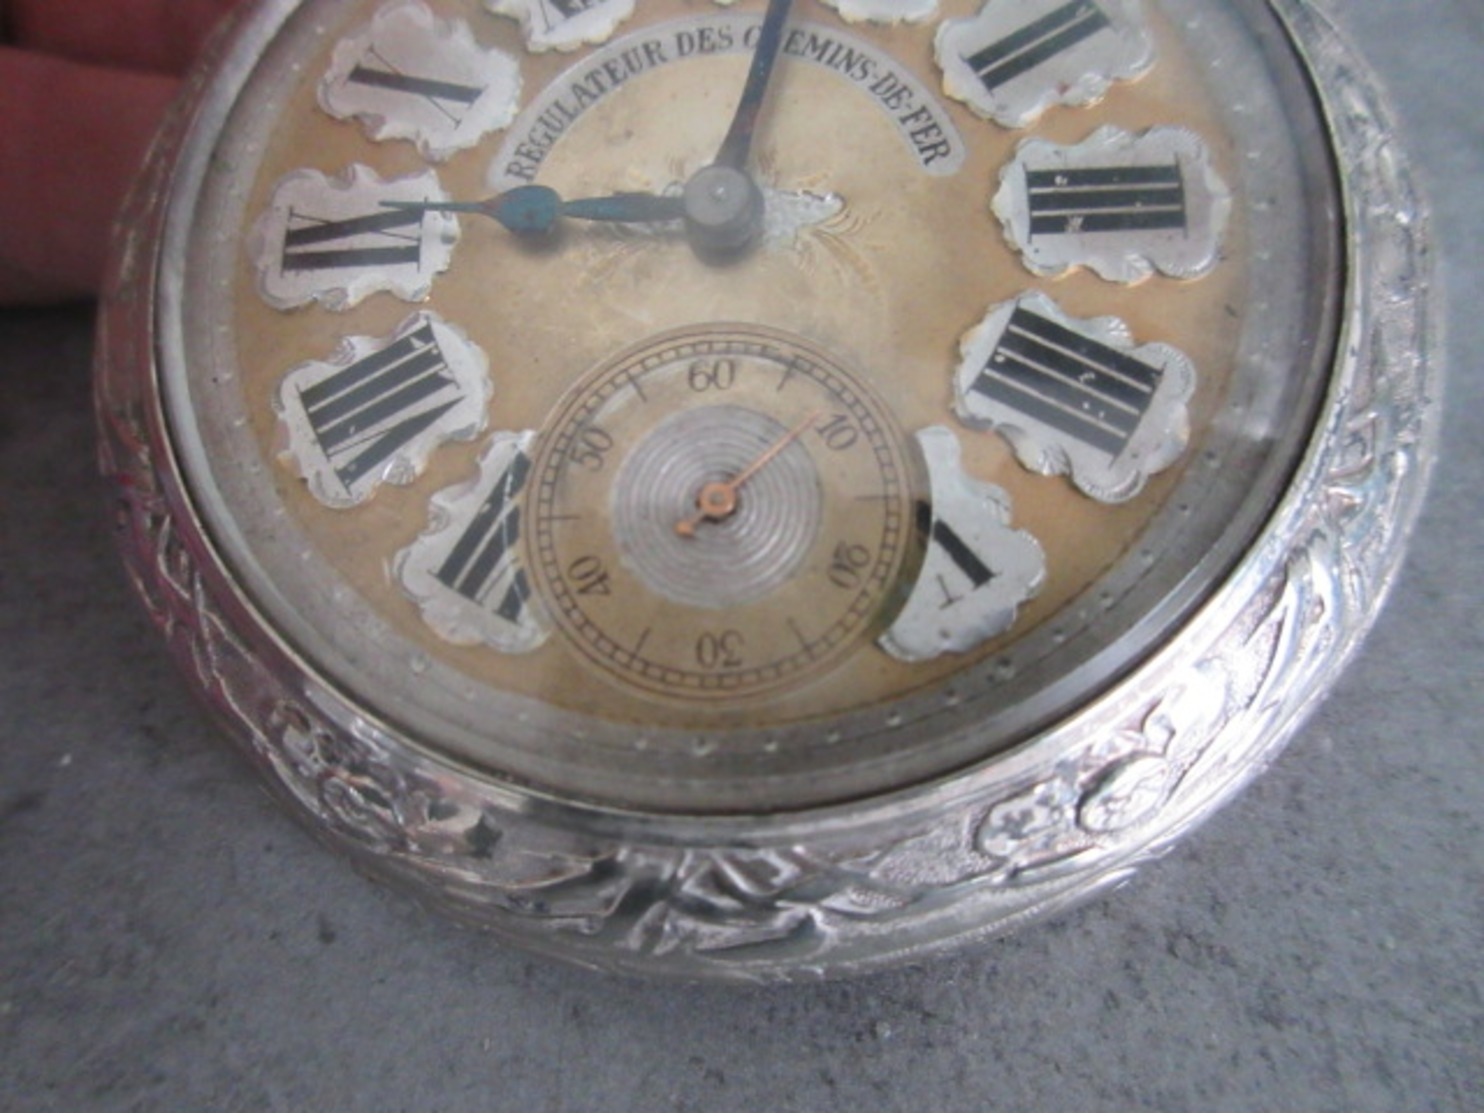 TRES BEAU REGULATEUR VERS 1900 - Watches: Old